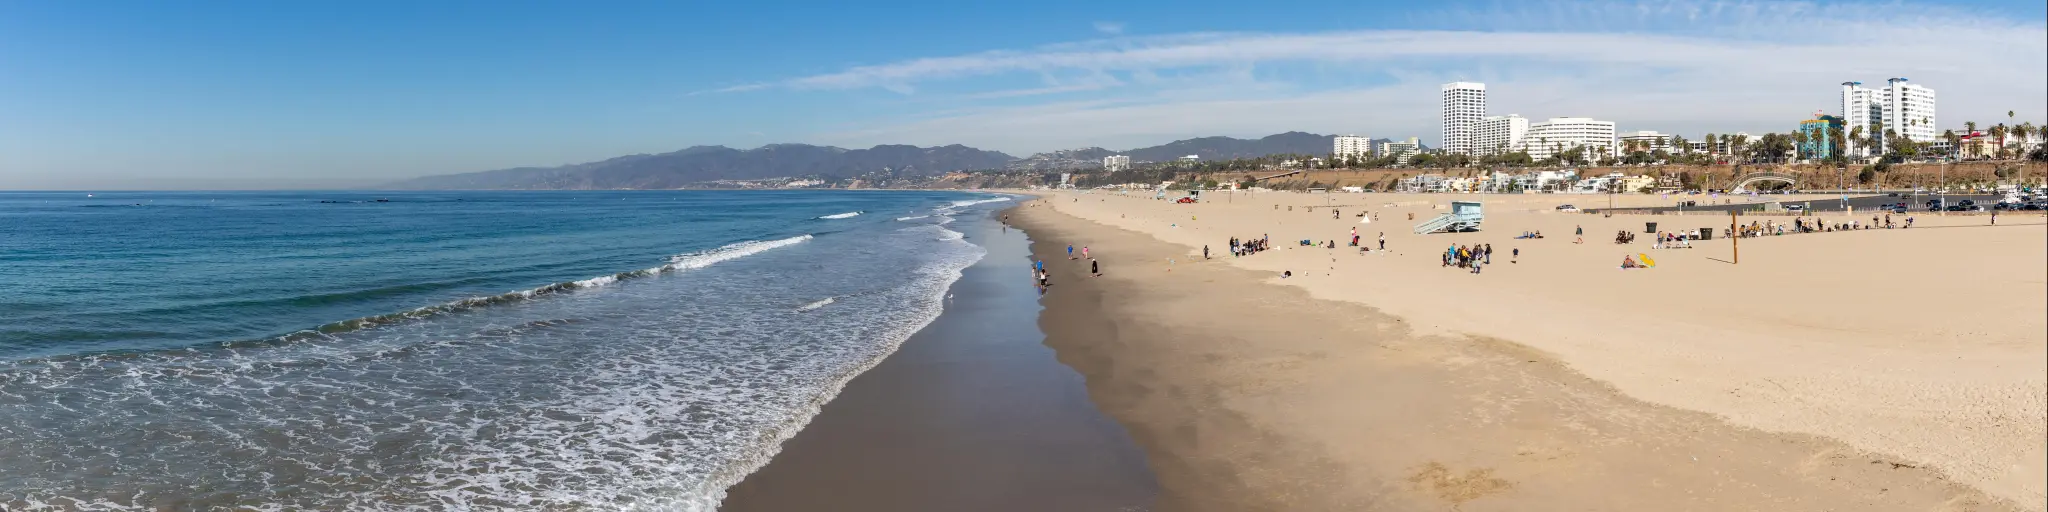 A panorama picture of the Santa Monica State Beach, with waves lapping against sandy shore